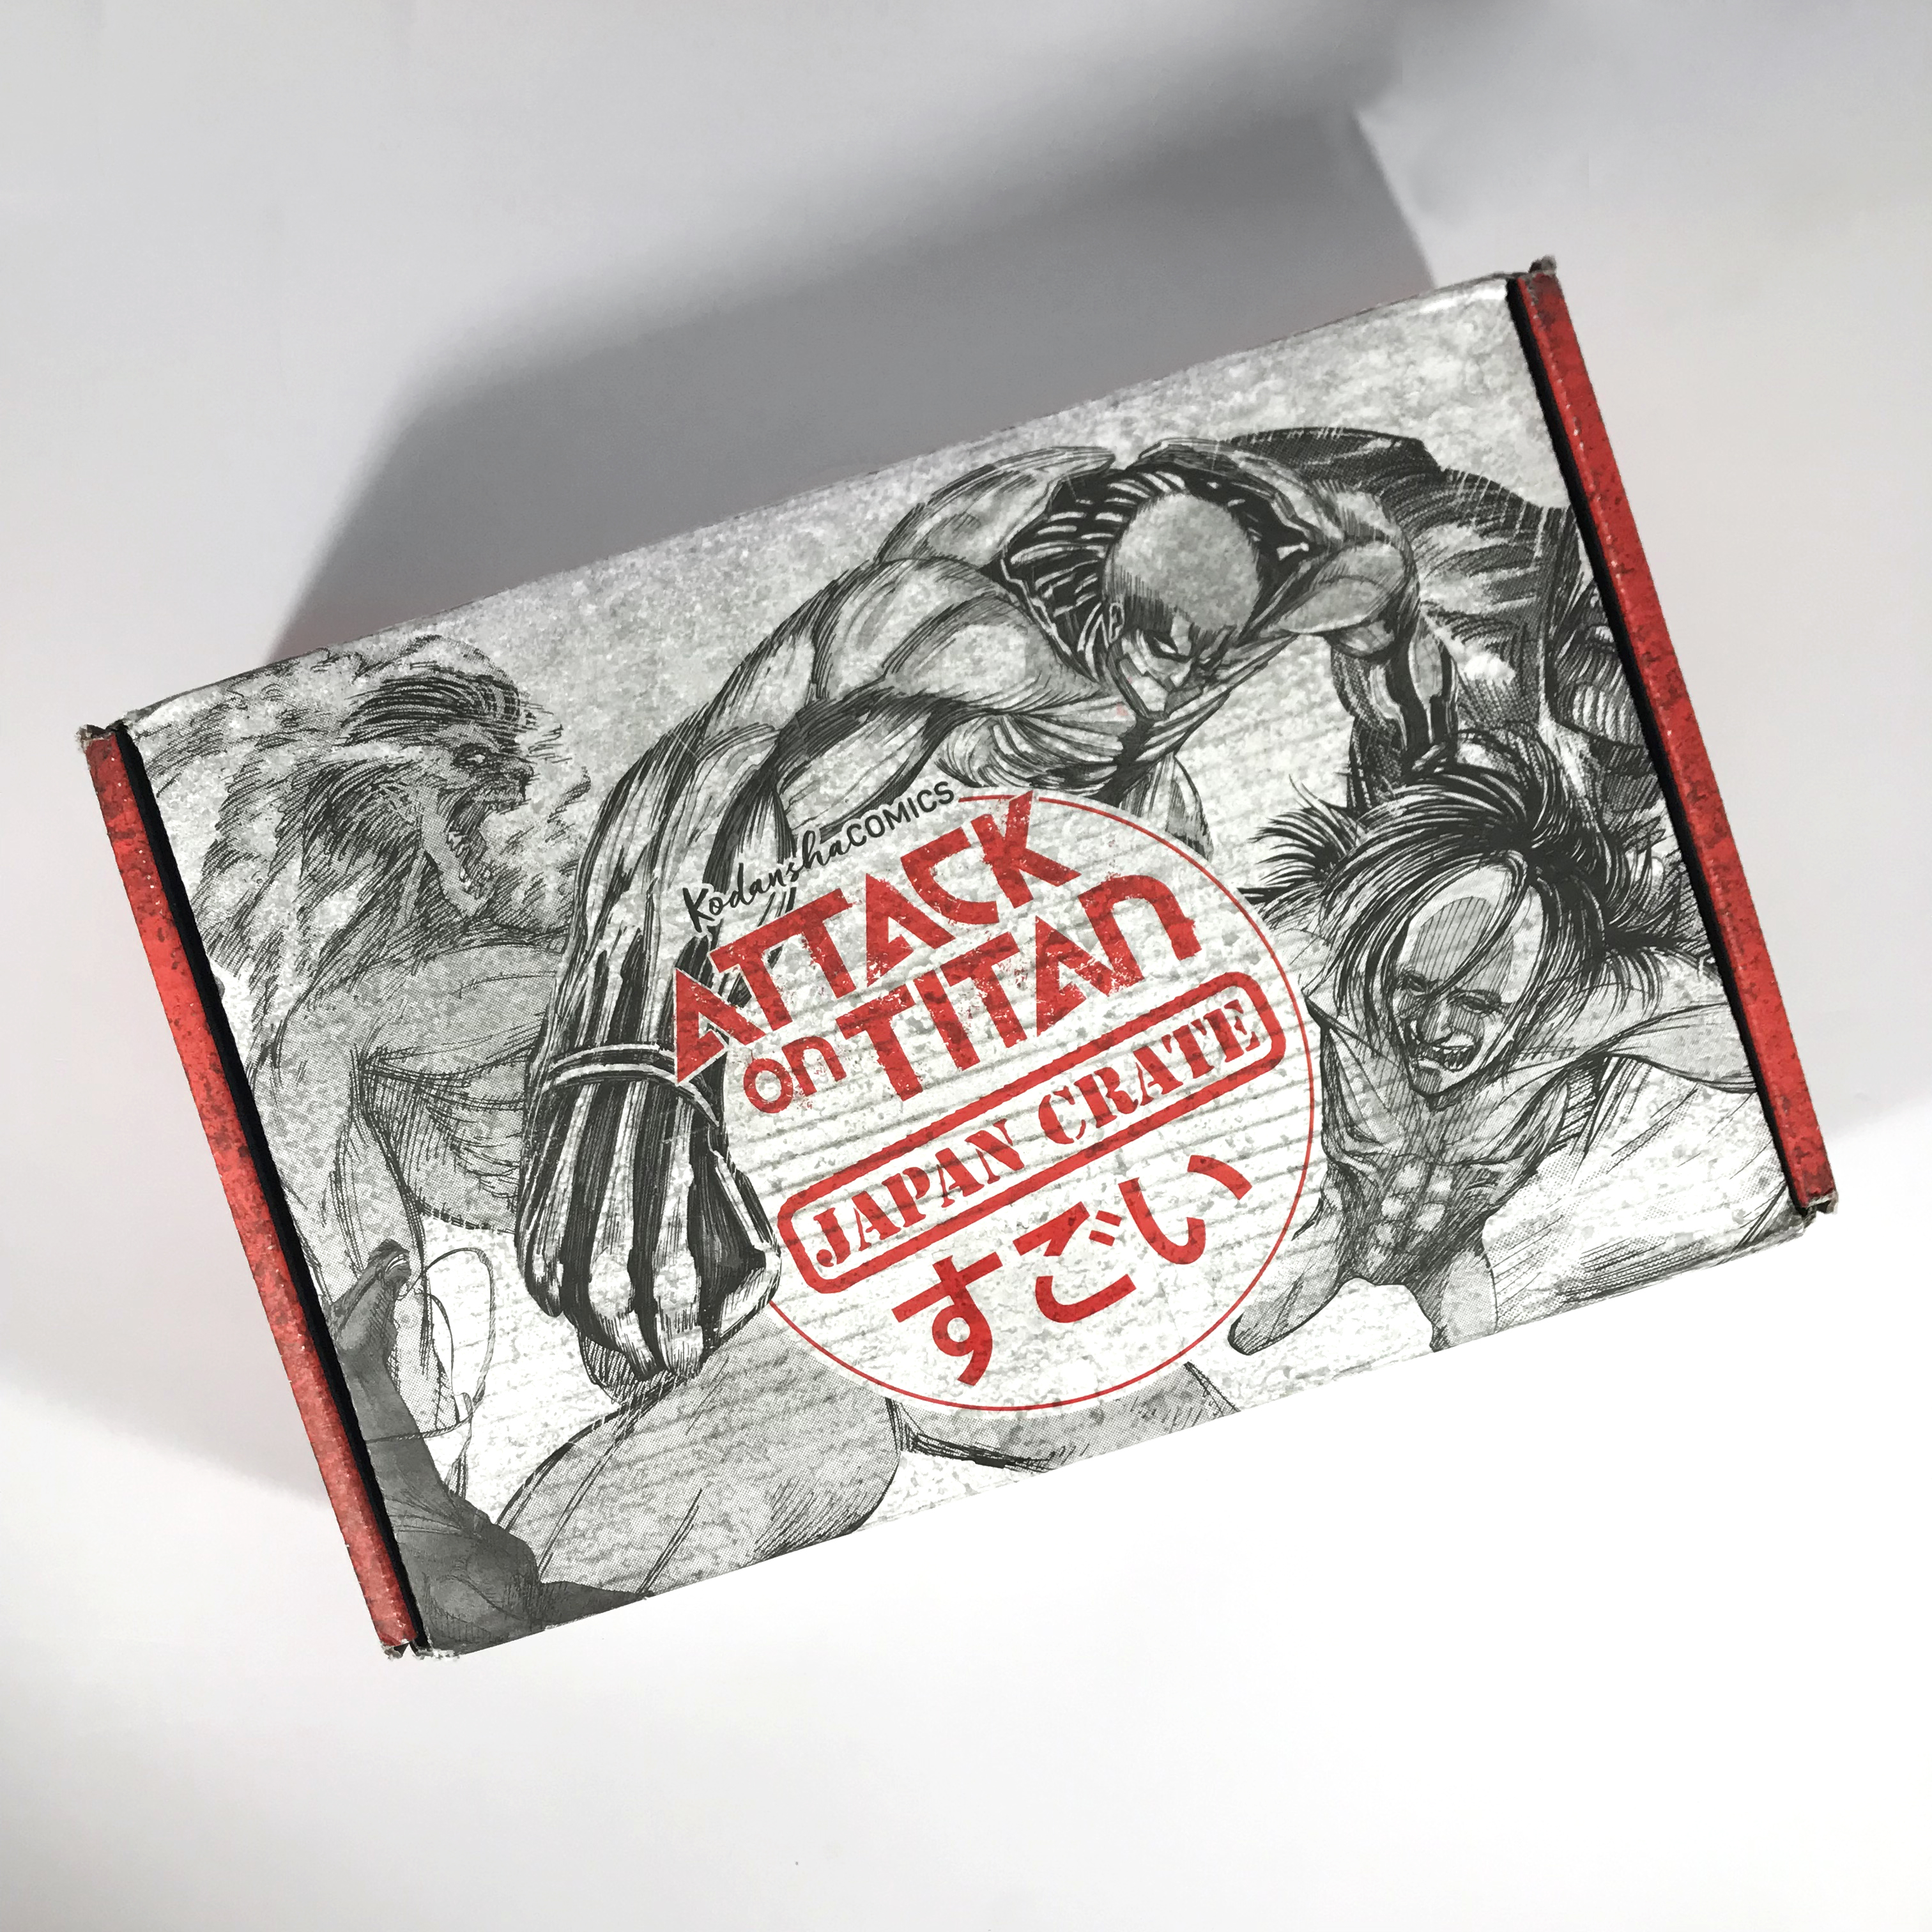 Attack on Titan Premium by Japan Crate Review + Coupon – January 2018